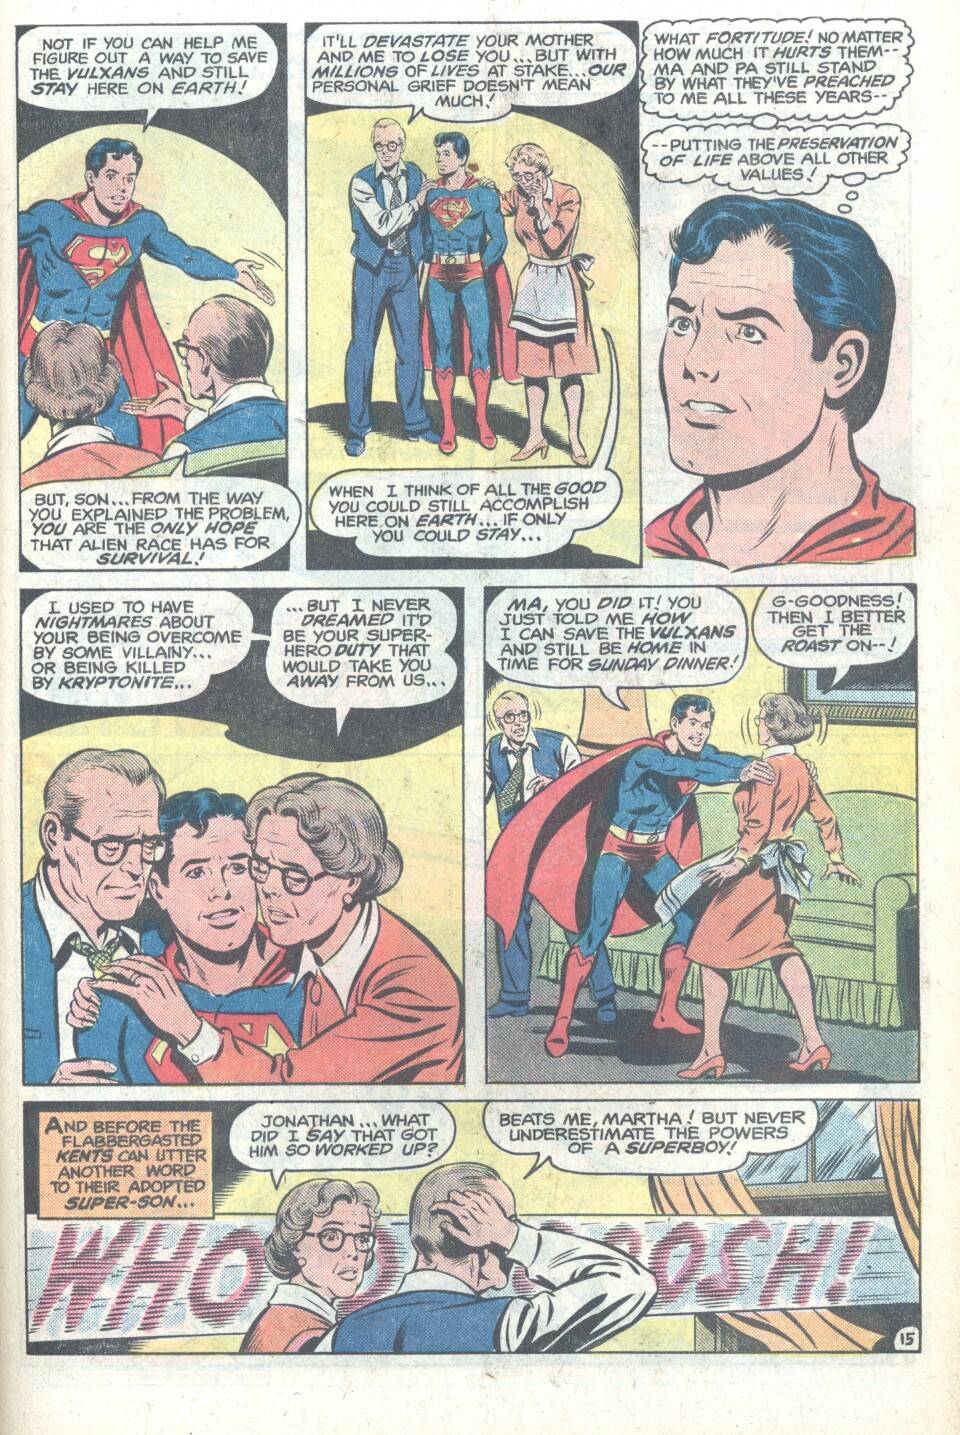 The New Adventures of Superboy 7 Page 45